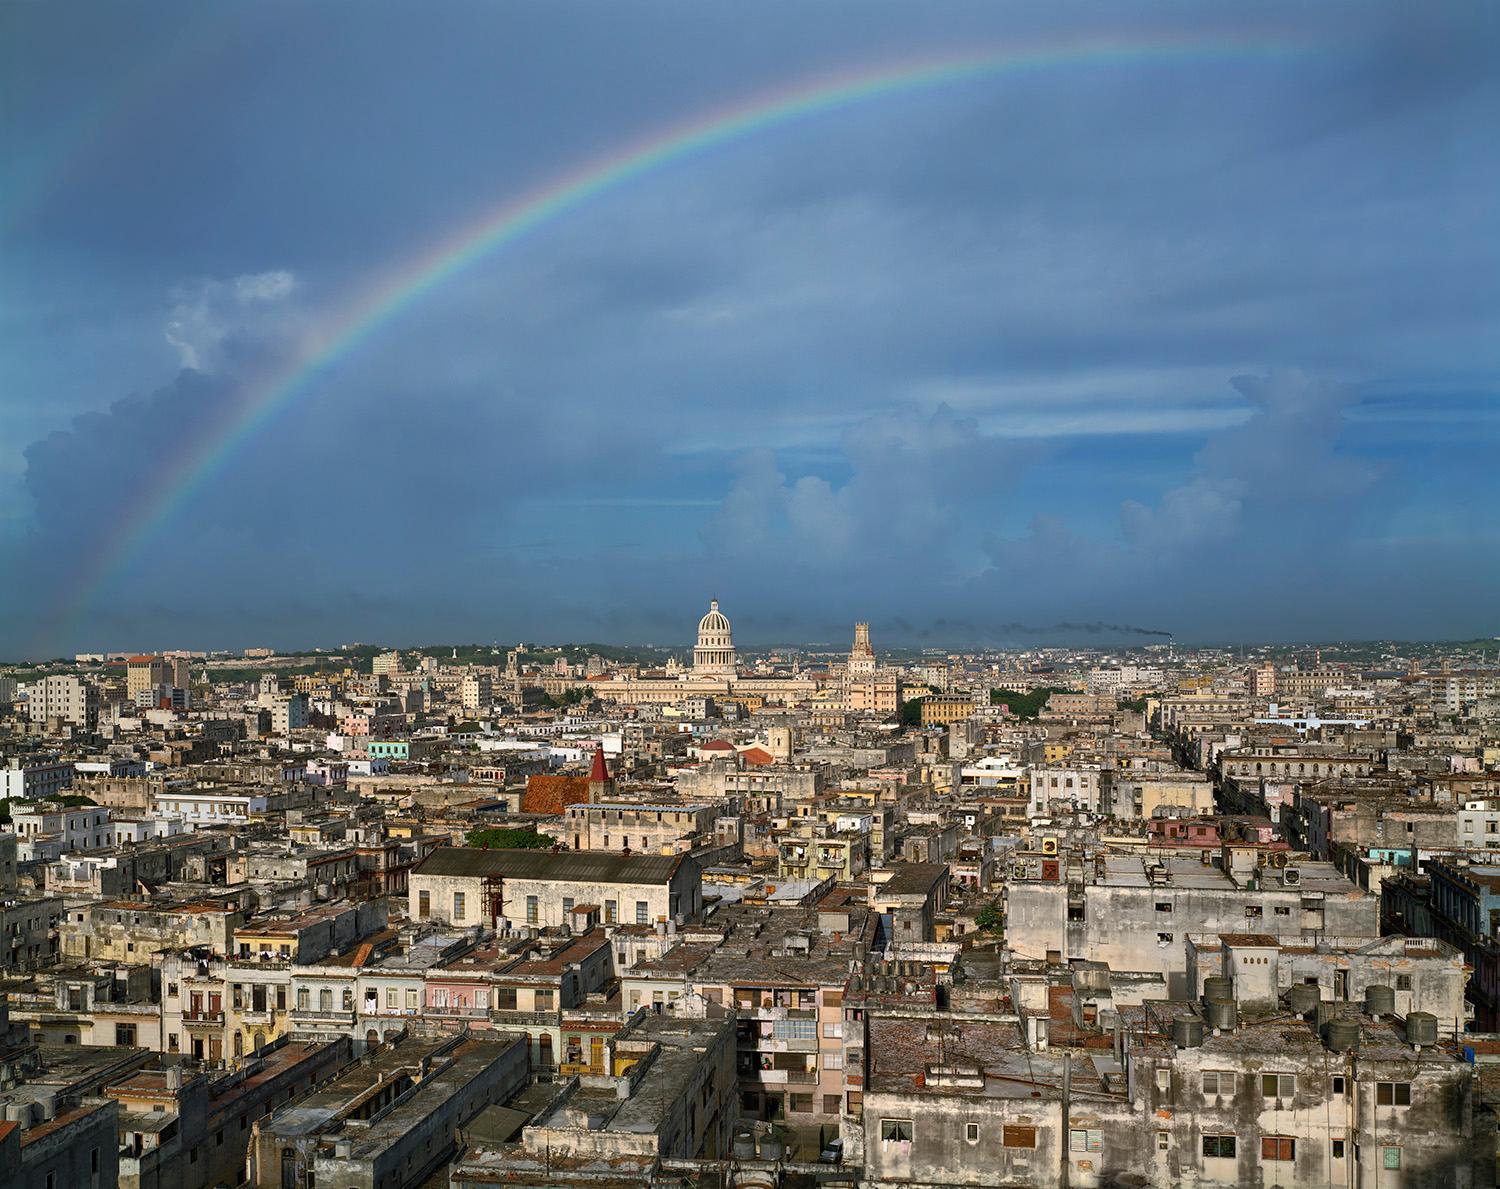 Archival Pigment Print

Rainbow over Central Havana

All available sizes & editions for each size of this photograph:
30" x 40” - Edition of 5 + 2 Artist Proofs
40" X 50"- Edition of 5 + 2 Artist Proofs
50" X 60"-  Edition of 5 + 2 Artist